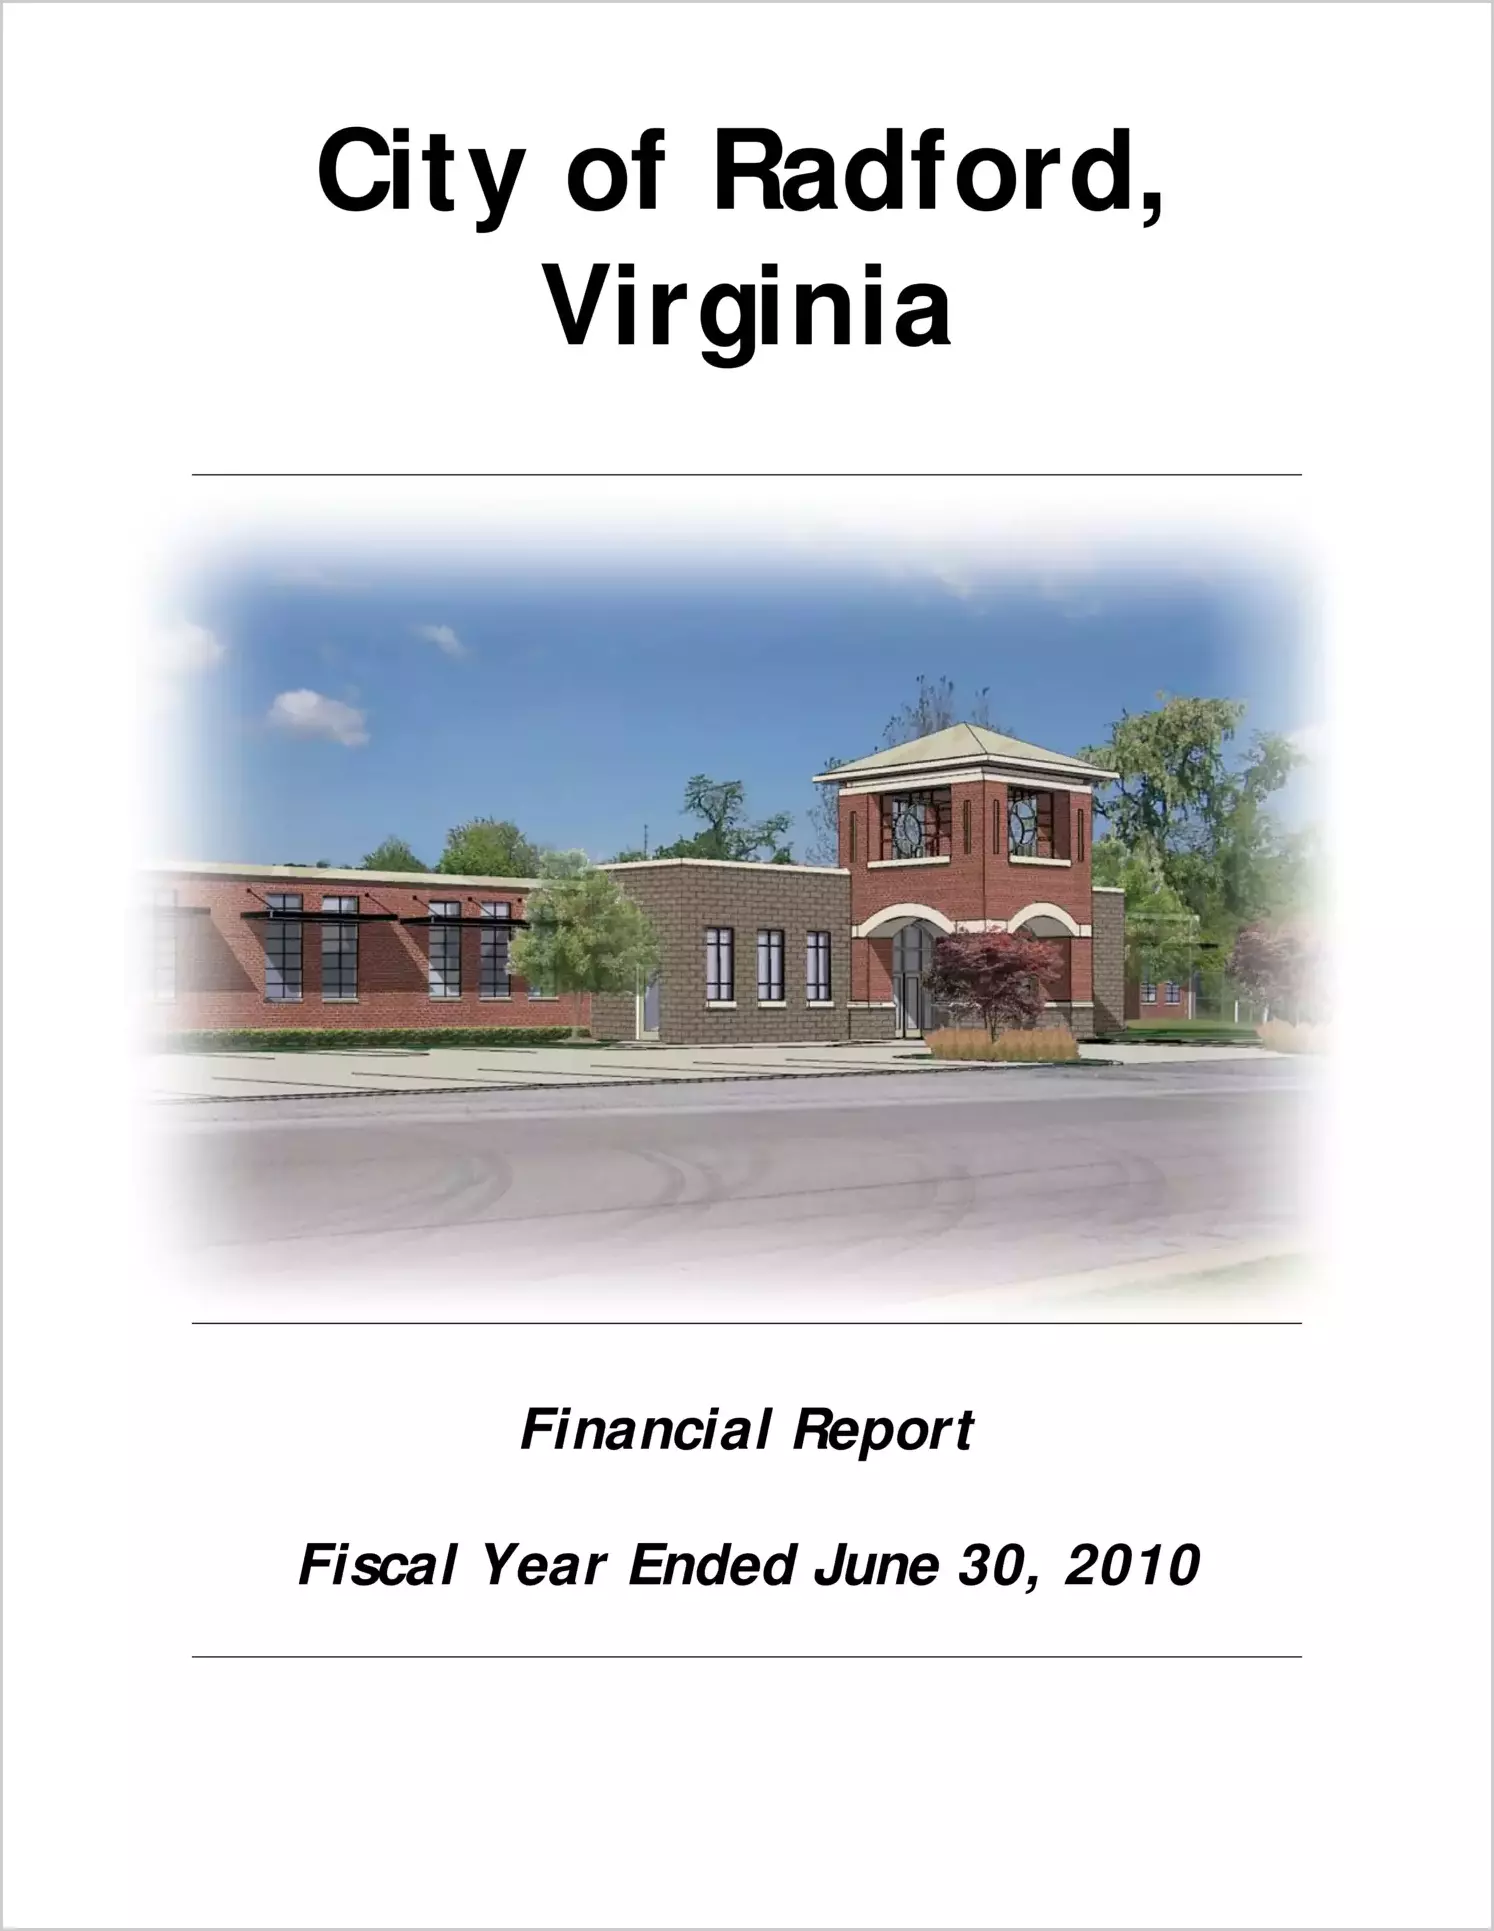 2010 Annual Financial Report for City of Radford